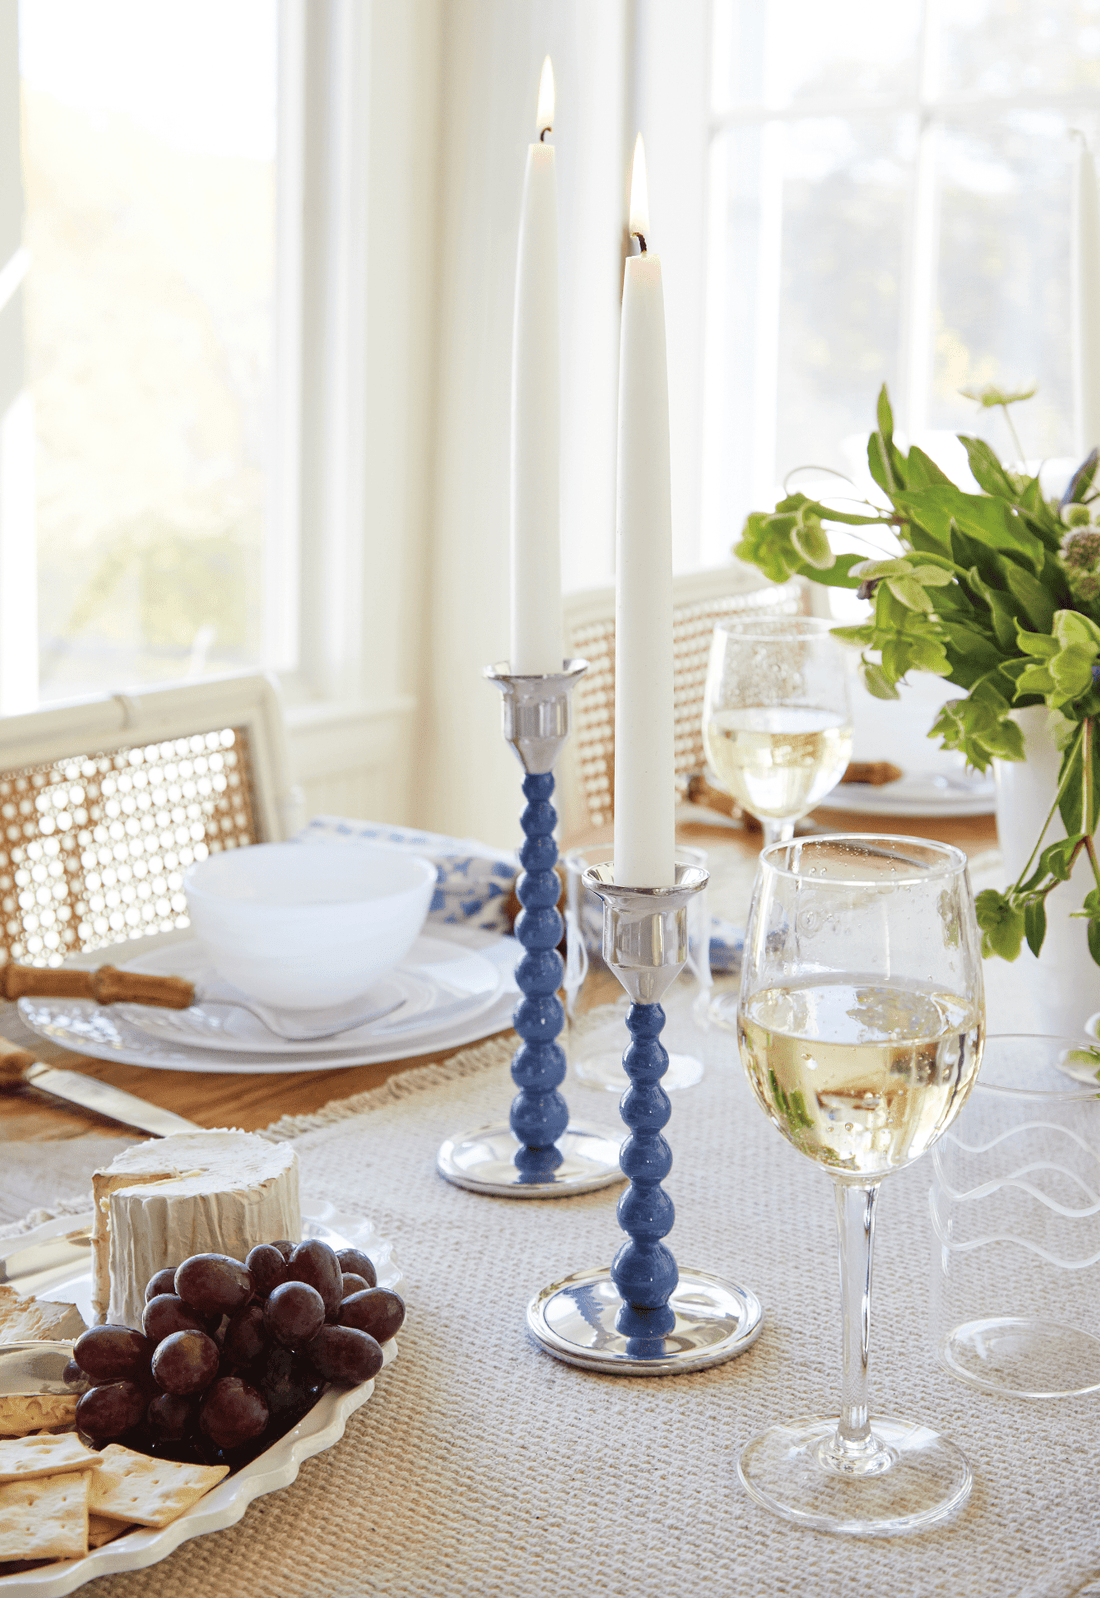 Blue Pearled Small Candlestick Set